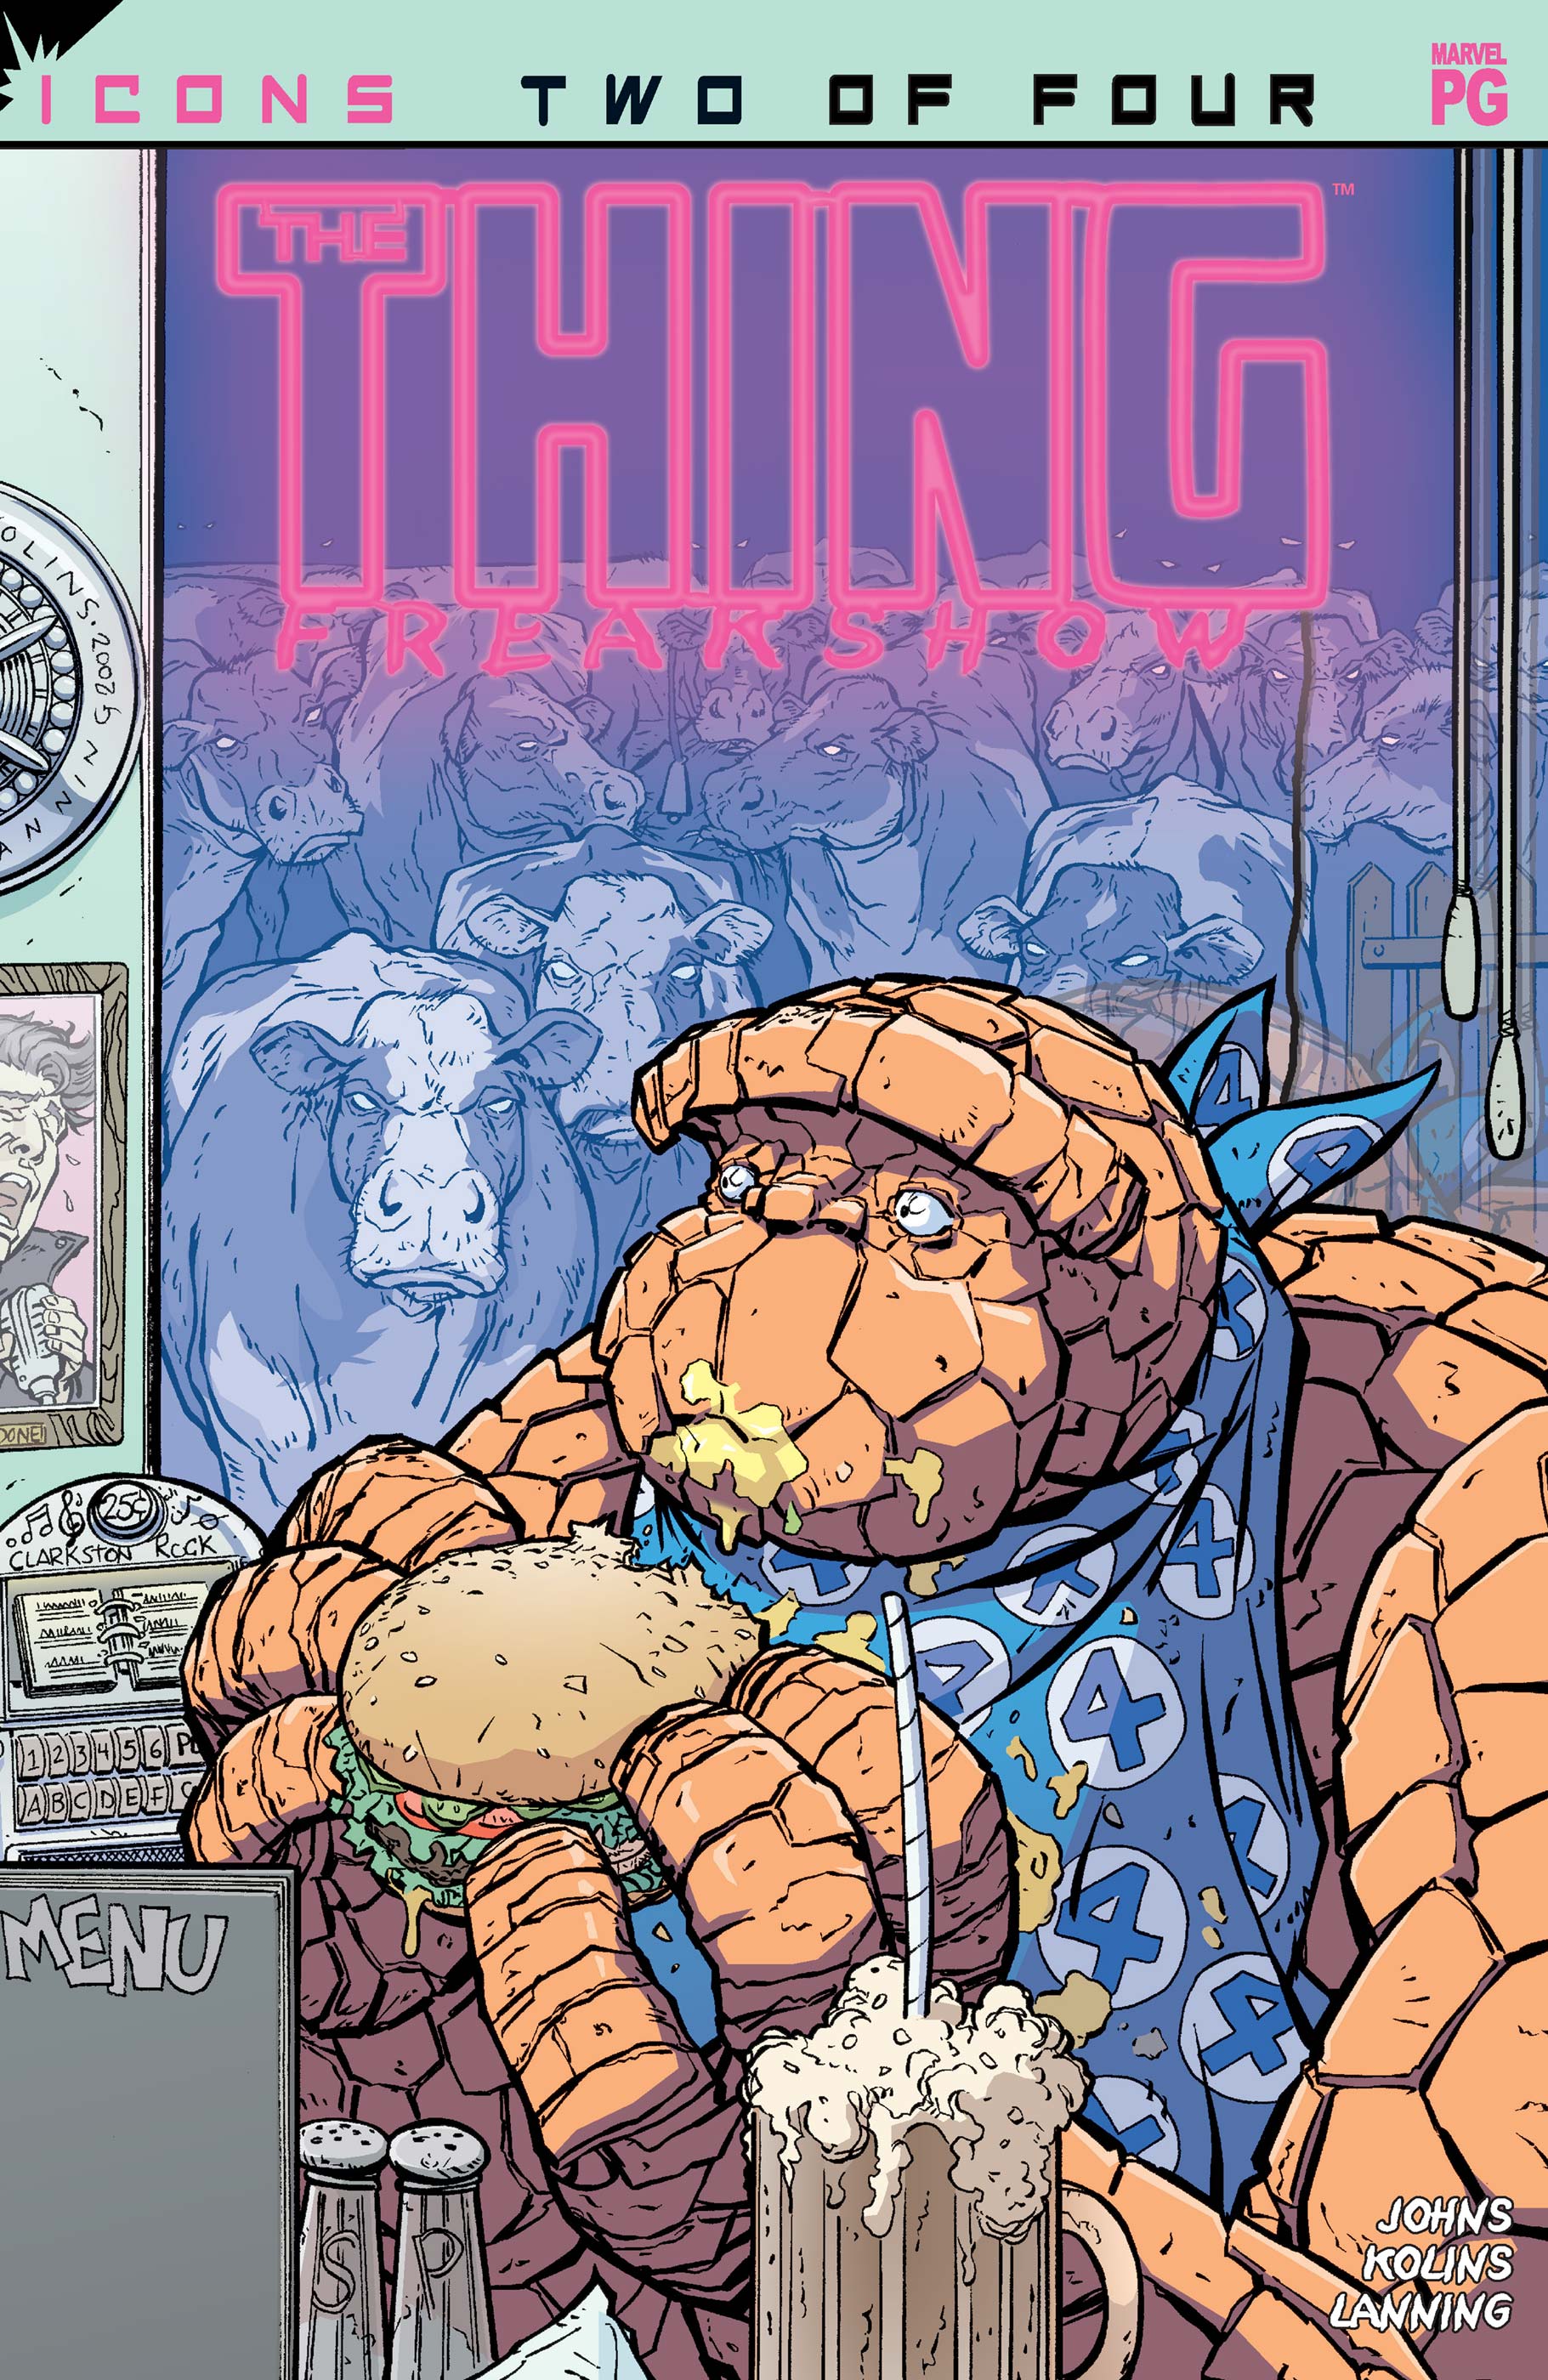 Thing: Freakshow (2002) #2